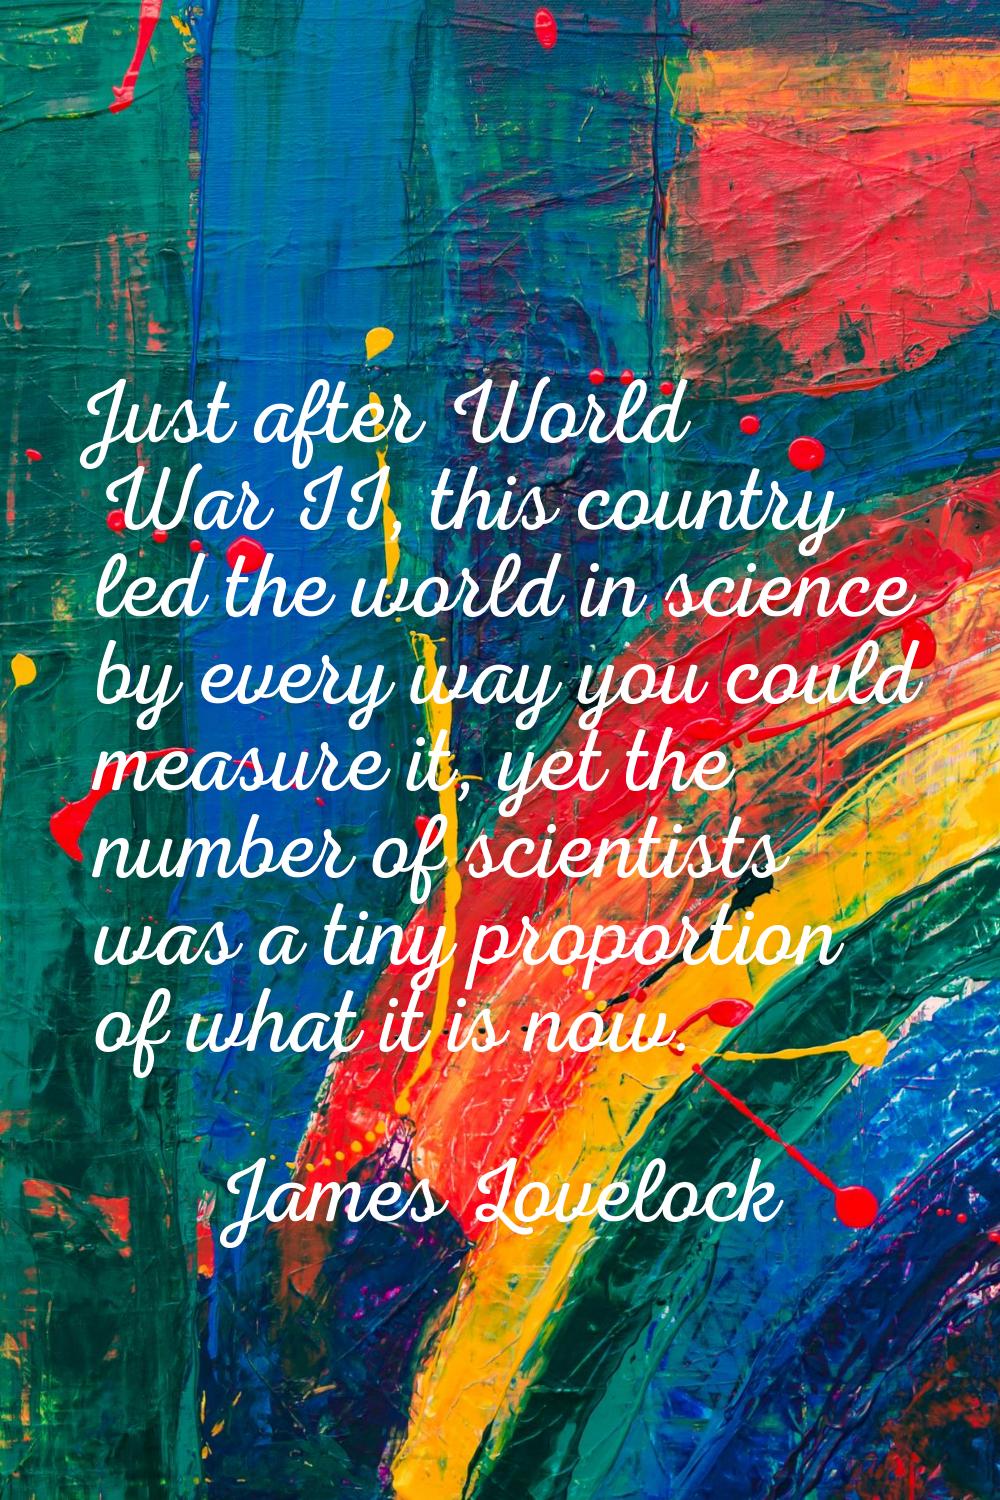 Just after World War II, this country led the world in science by every way you could measure it, y